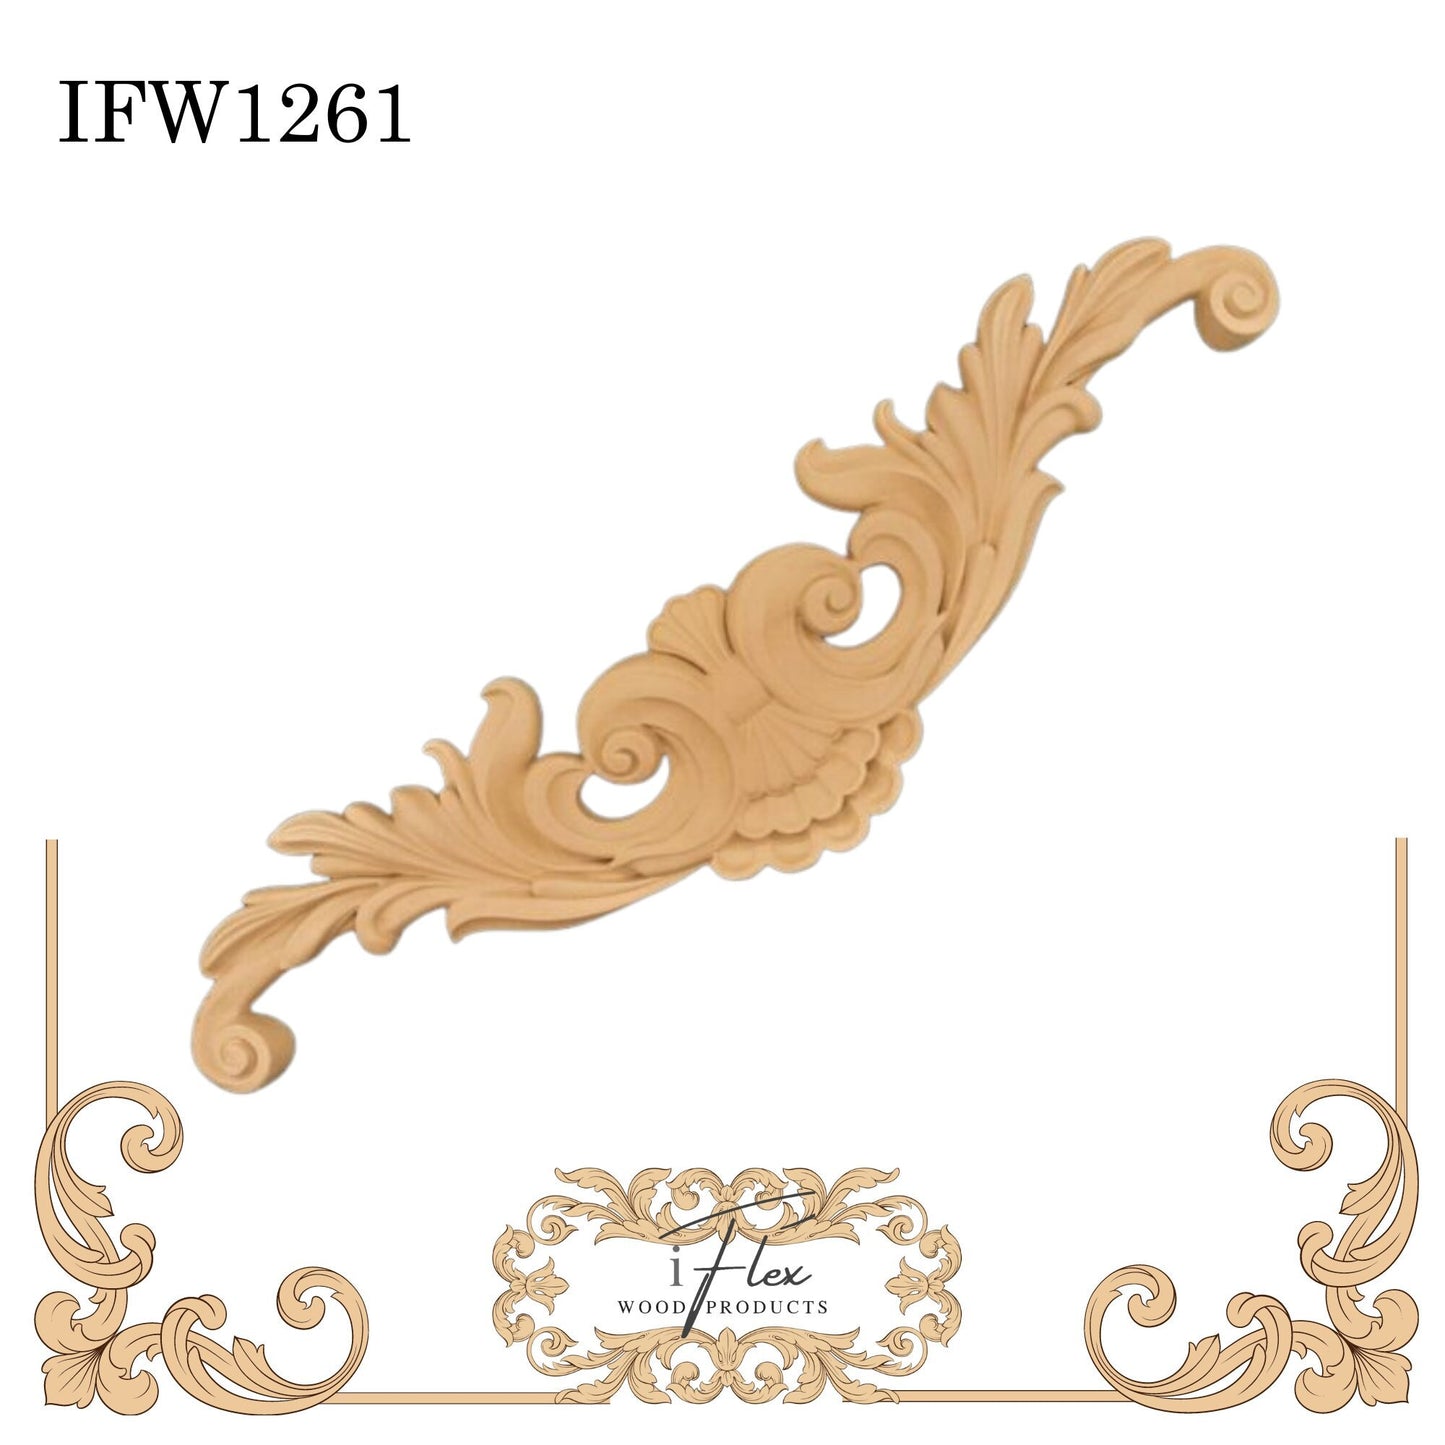 IFW 1261A iFlex Wood Products, bendable mouldings, flexible, wooden appliques, pediment, architectural piece